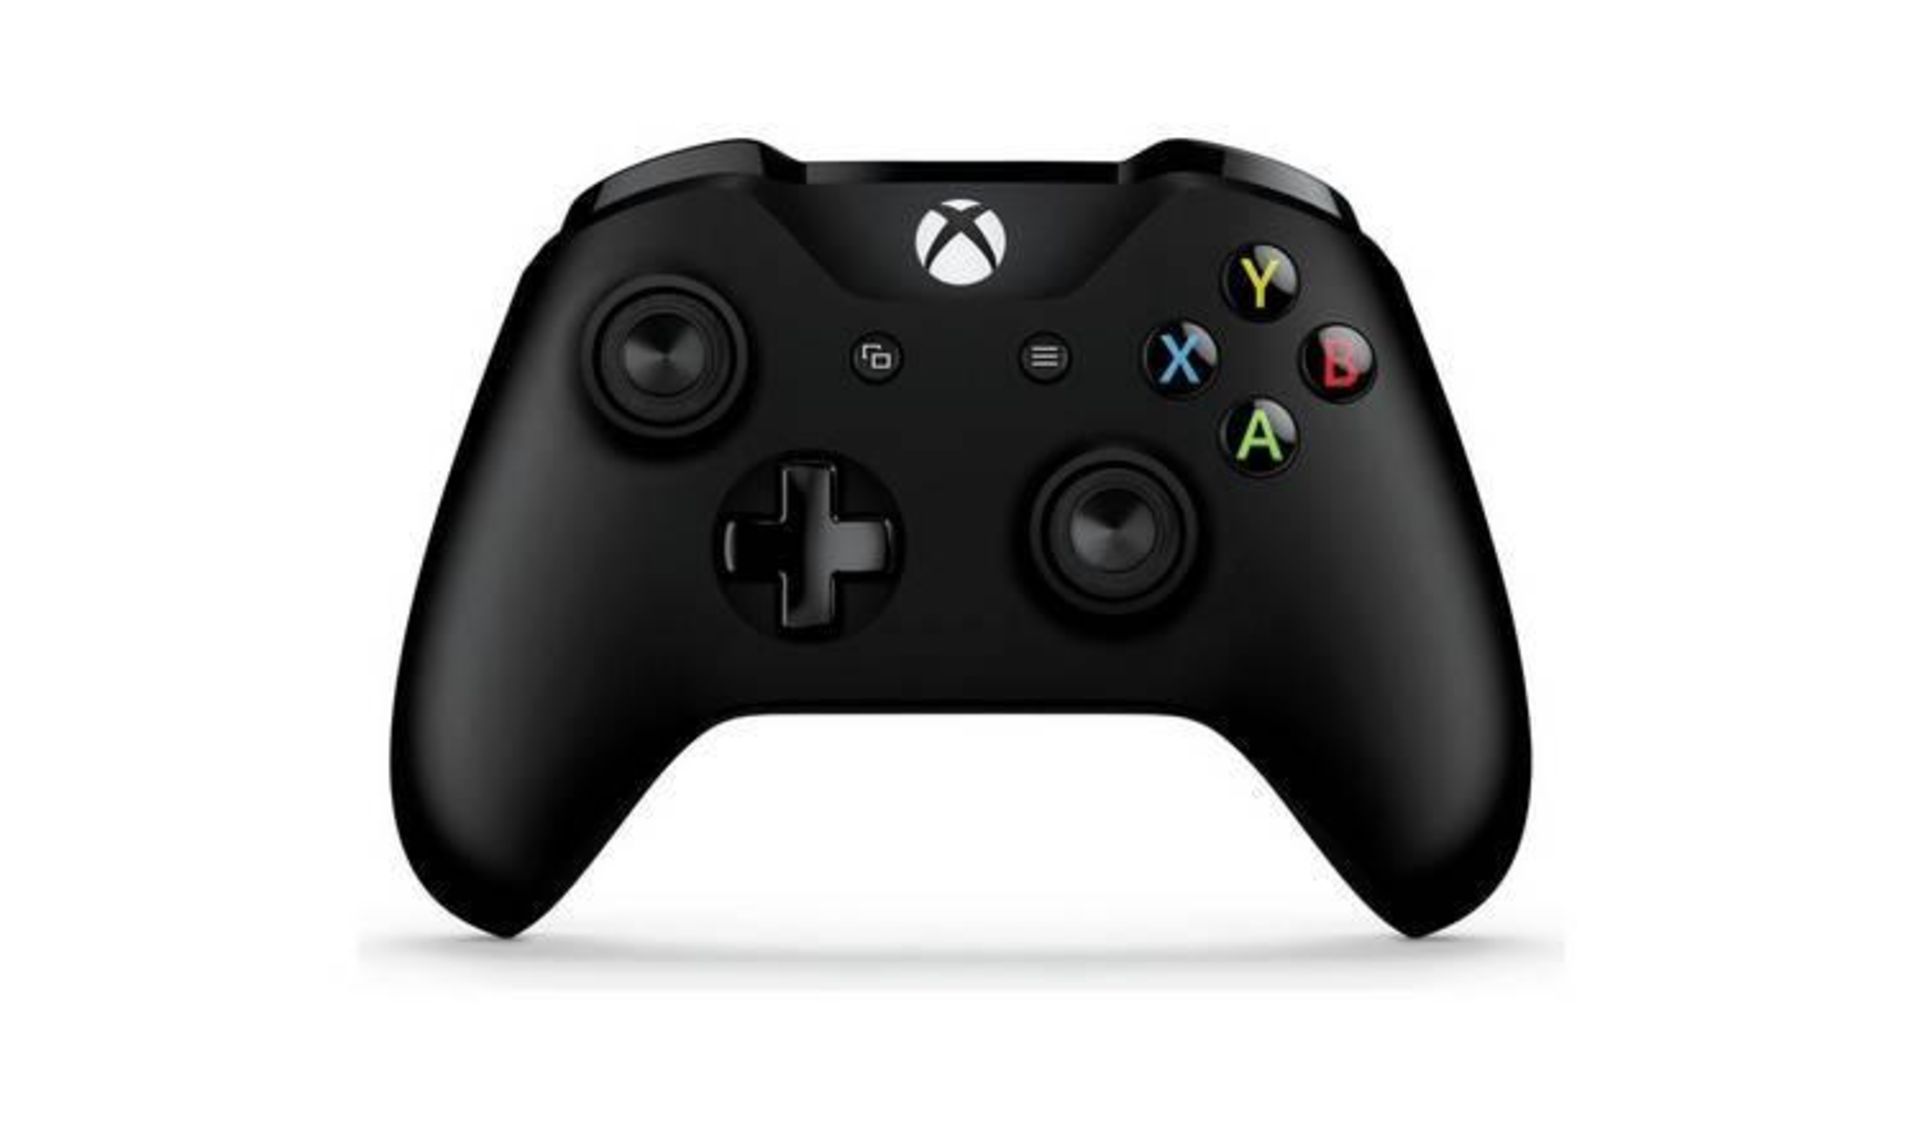 Official Xbox One Wireless Controller 3.5mm - Black (619/9582) - £39.99 RRP